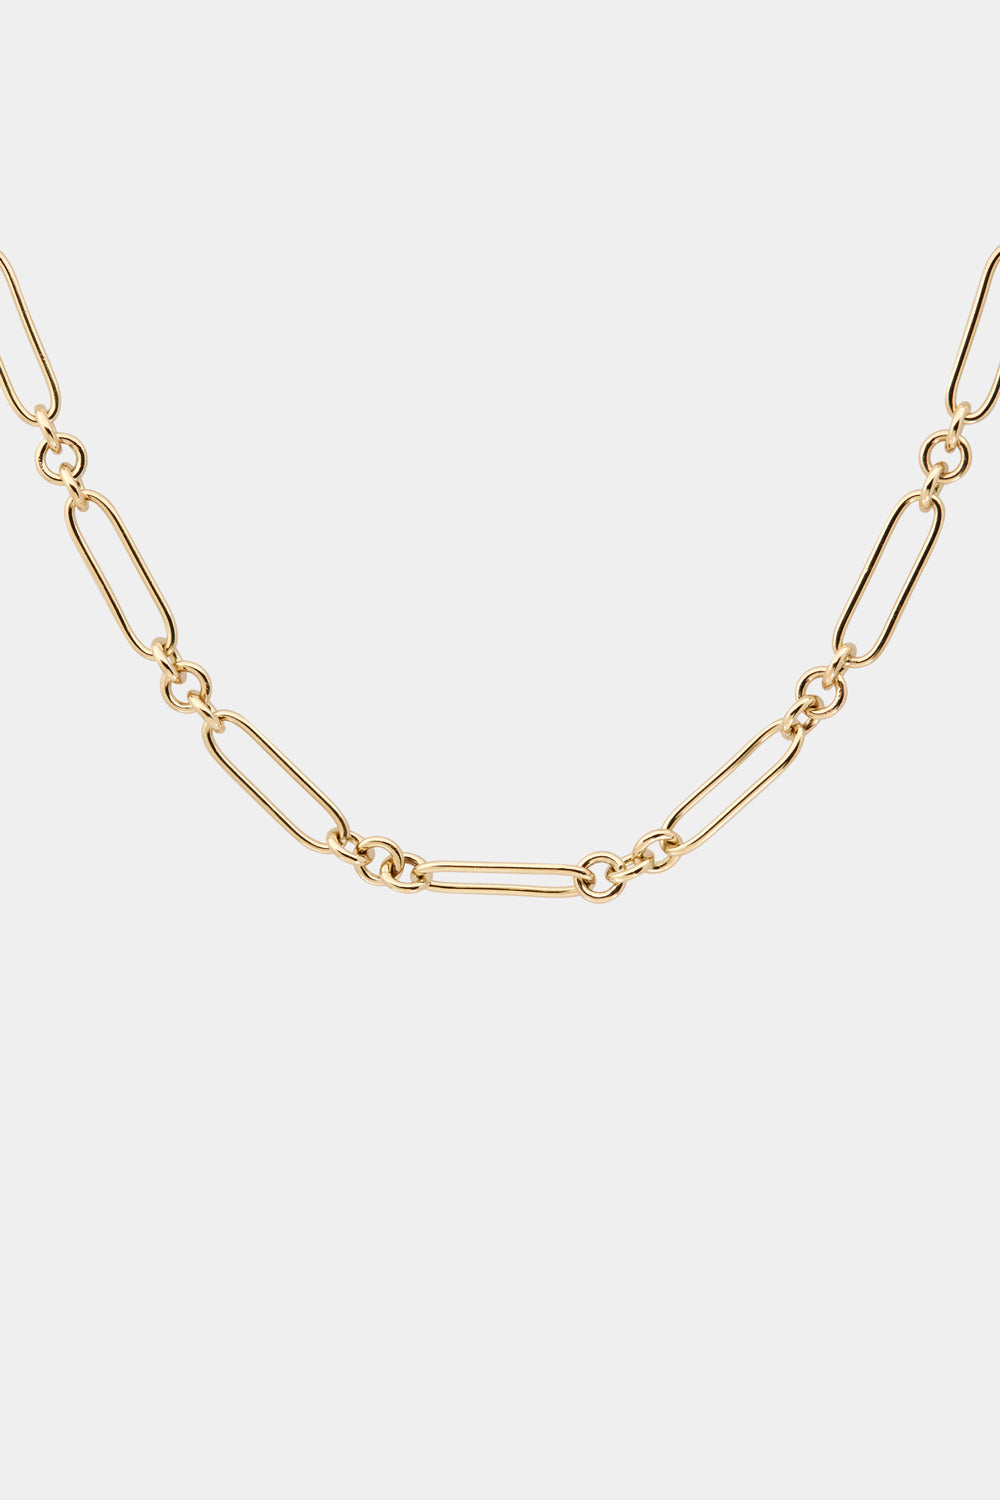 Lennox Necklace | 9K Yellow or Rose Gold